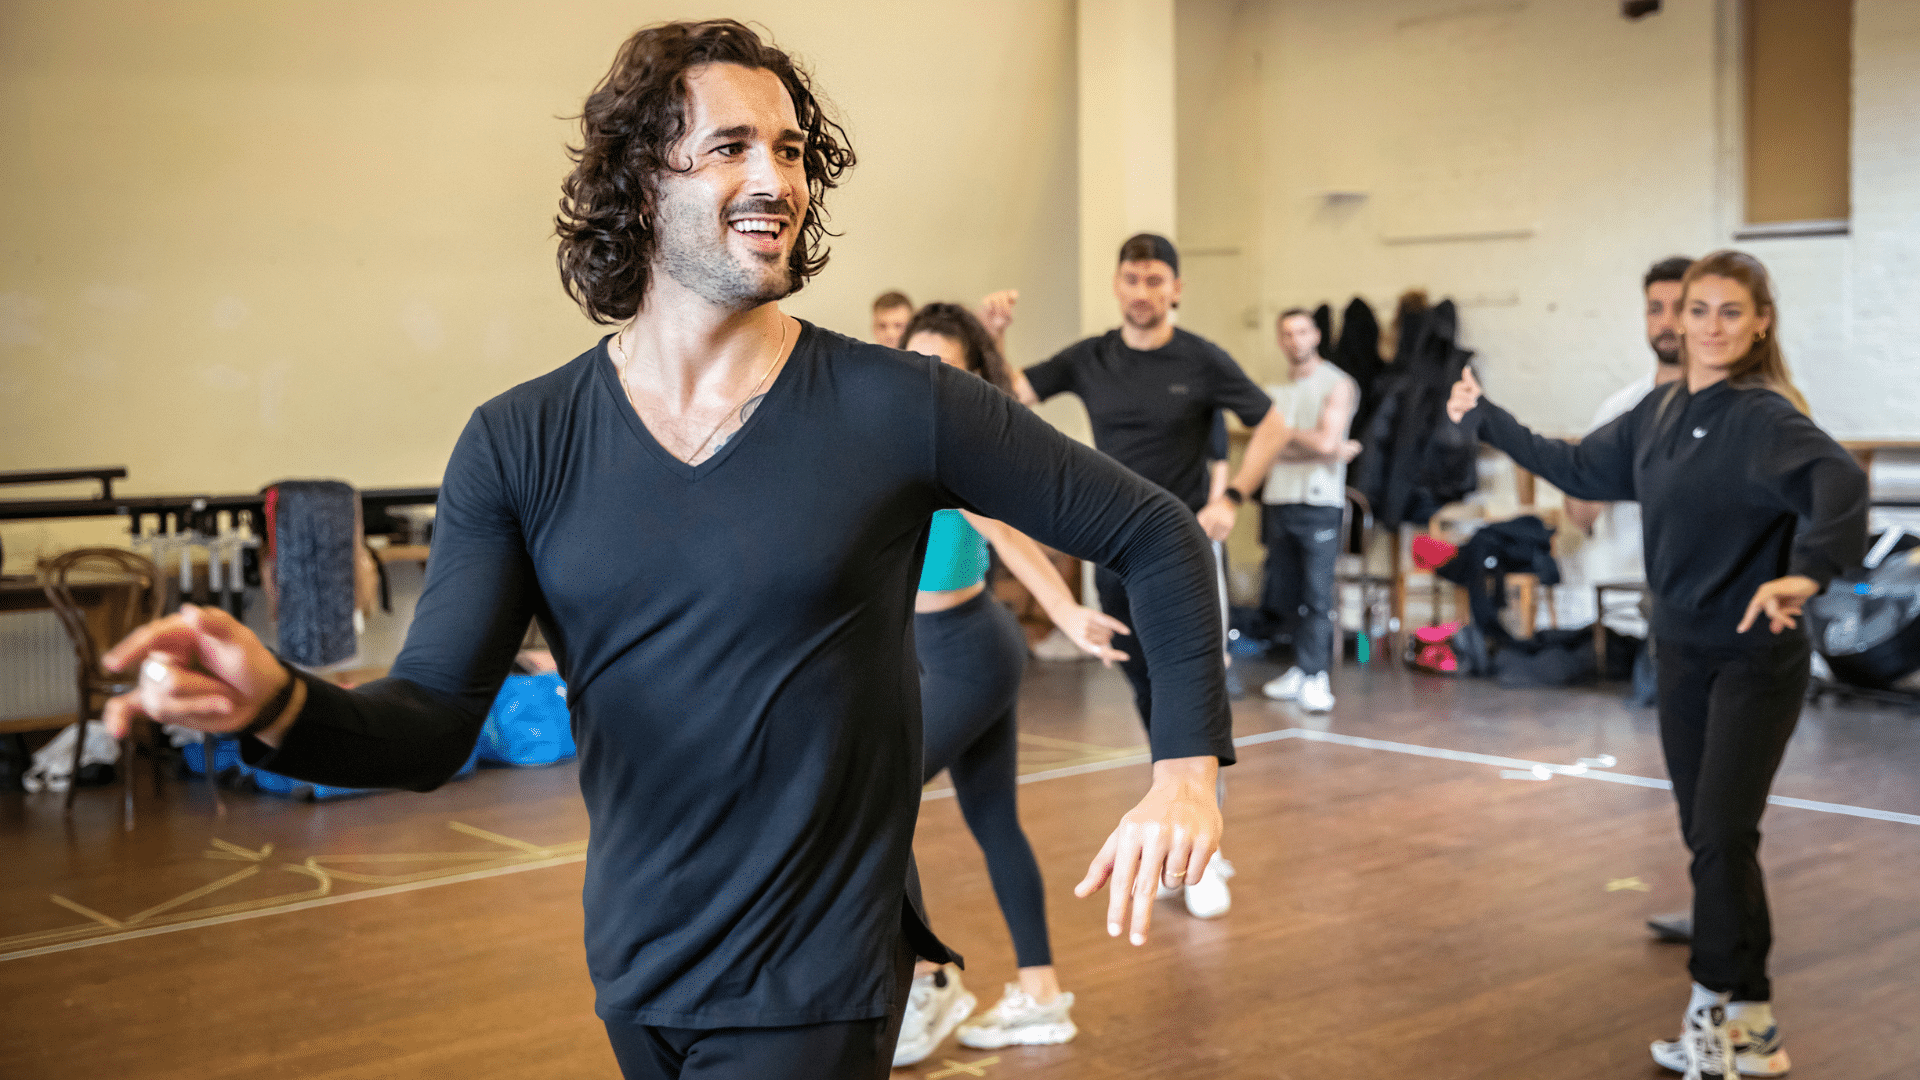 Rehearsal photo. Graziano Di Prima seen from the waist up, wearing a black long-sleeved top, jives. He is smiling at a point off-camera. Four other casually-dressed dancers are mimicking his arms position.